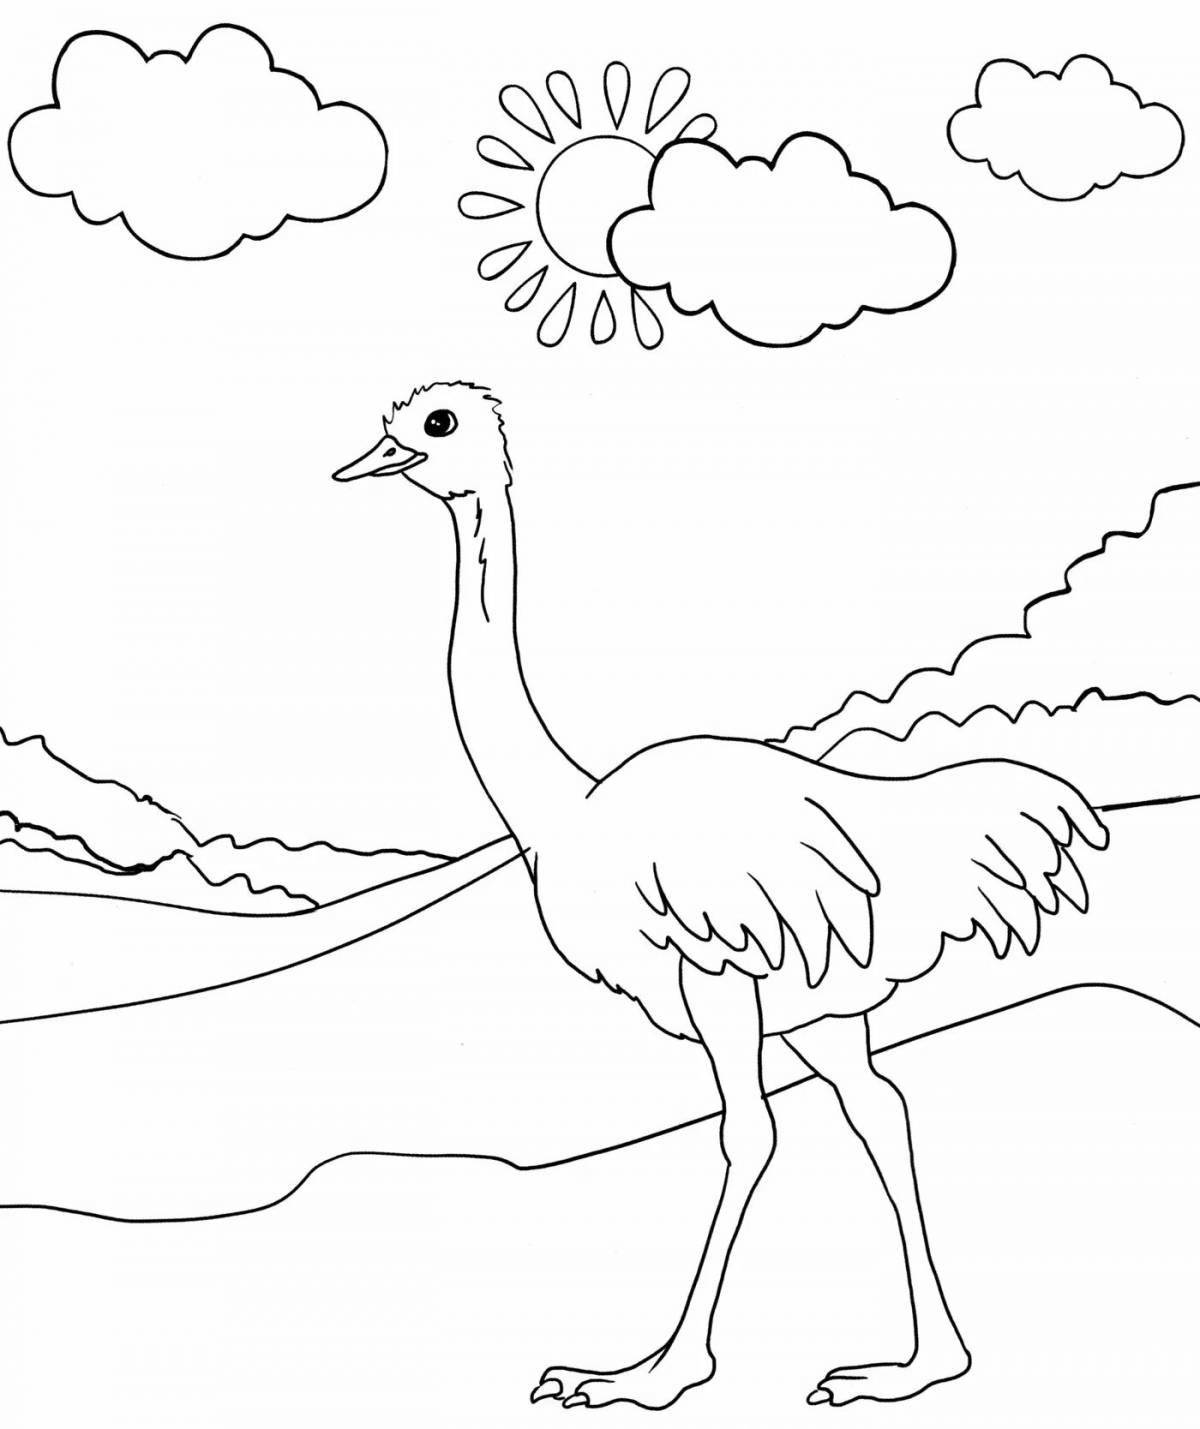 Adorable ostrich coloring pages for kids